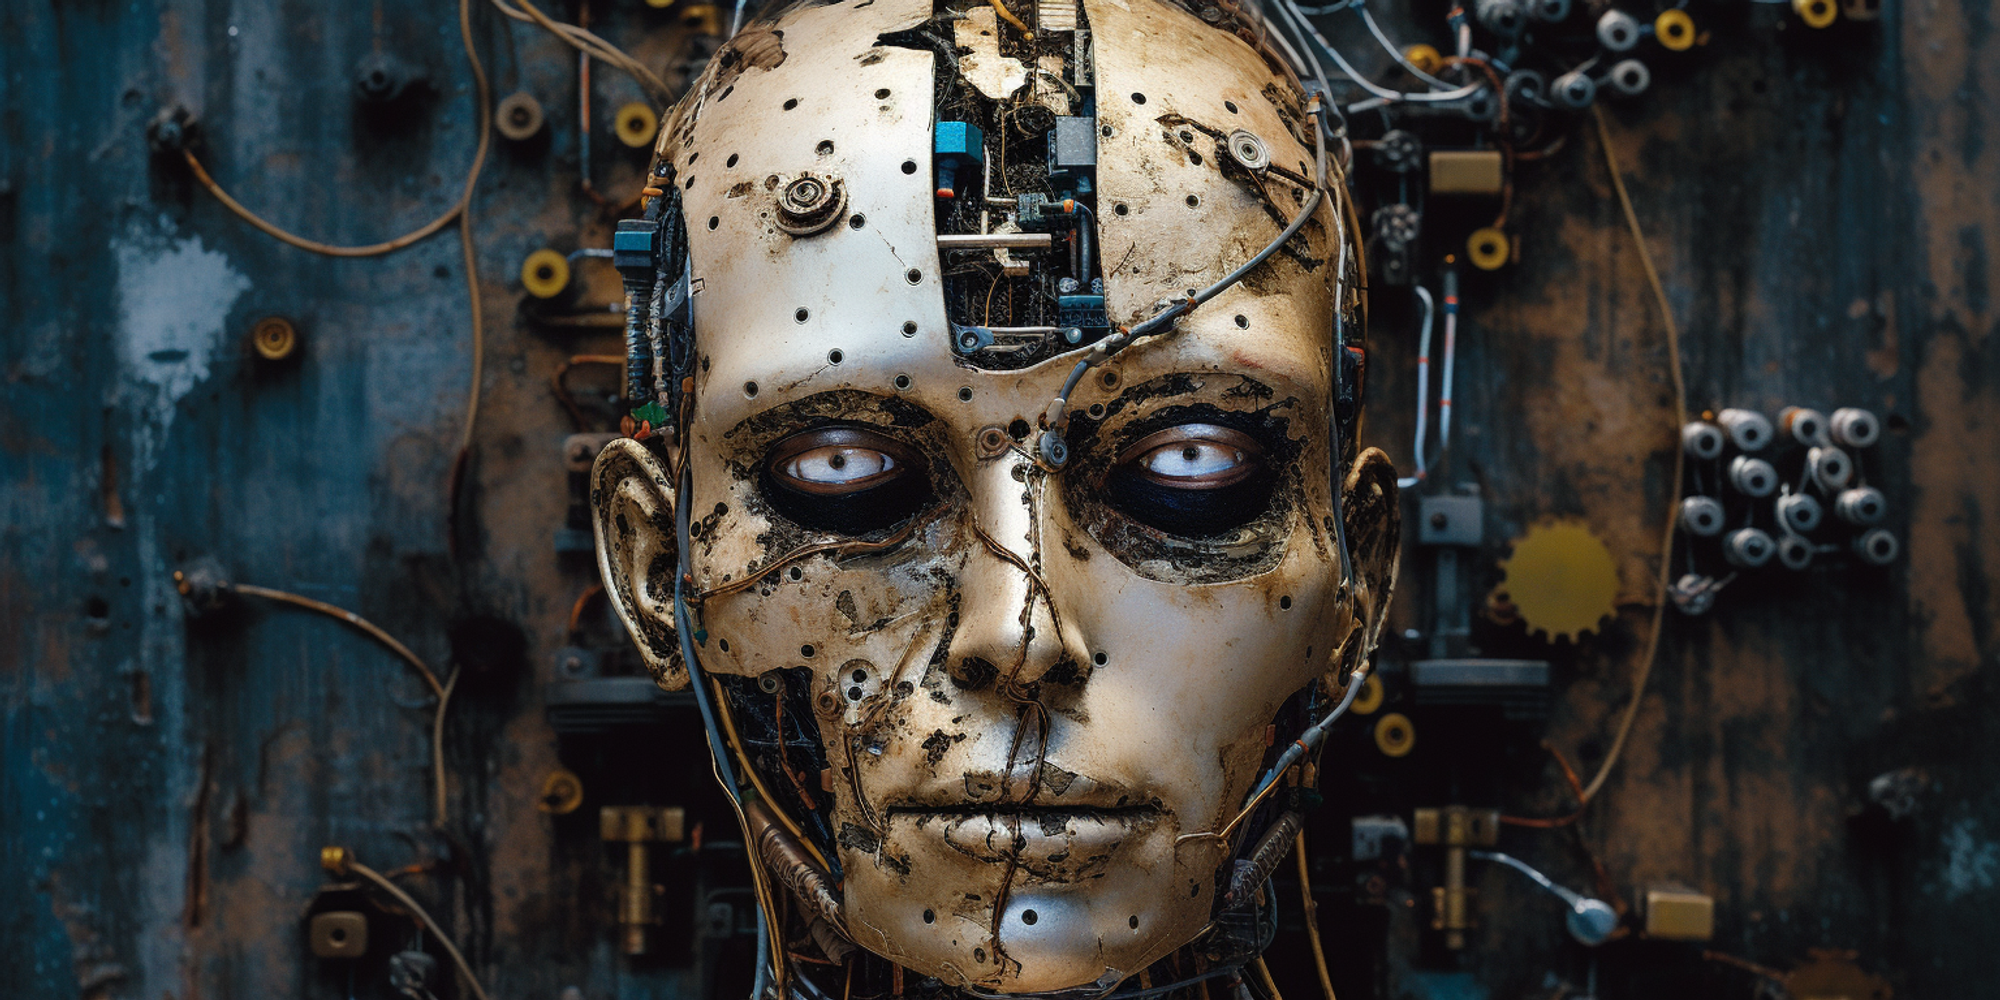 moodyanna_A_damaged_robot_with_exposed_circuits_in_a_worn-out_s_34241322-4de2-4d5a-8dc1-28fc2839b8b5.png